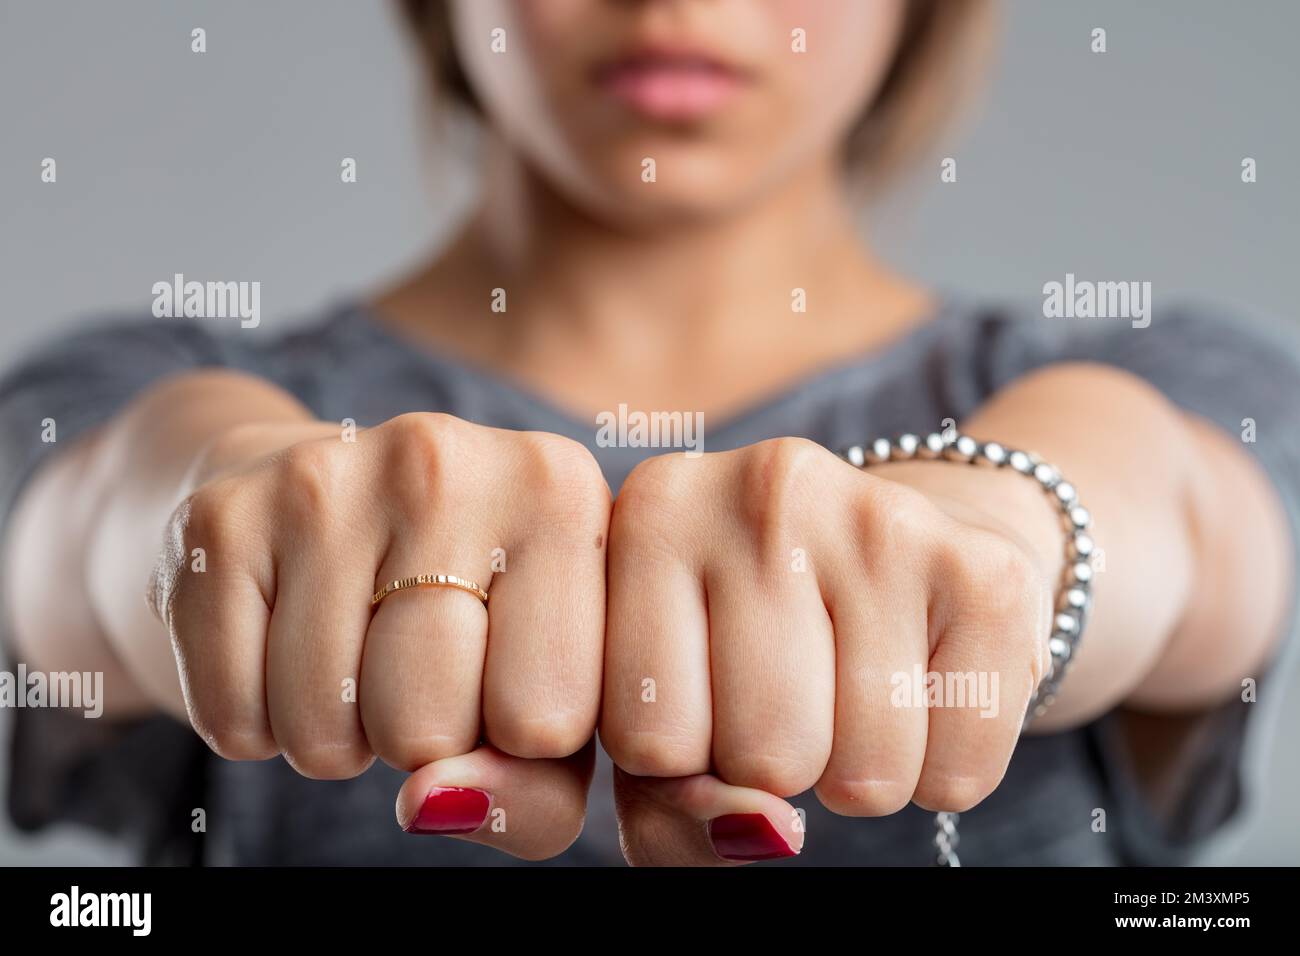 fists clenched together of a young woman. is this a sleight of hand and hiding something, or is it a threatening gesture? In any case, she is wearing Stock Photo